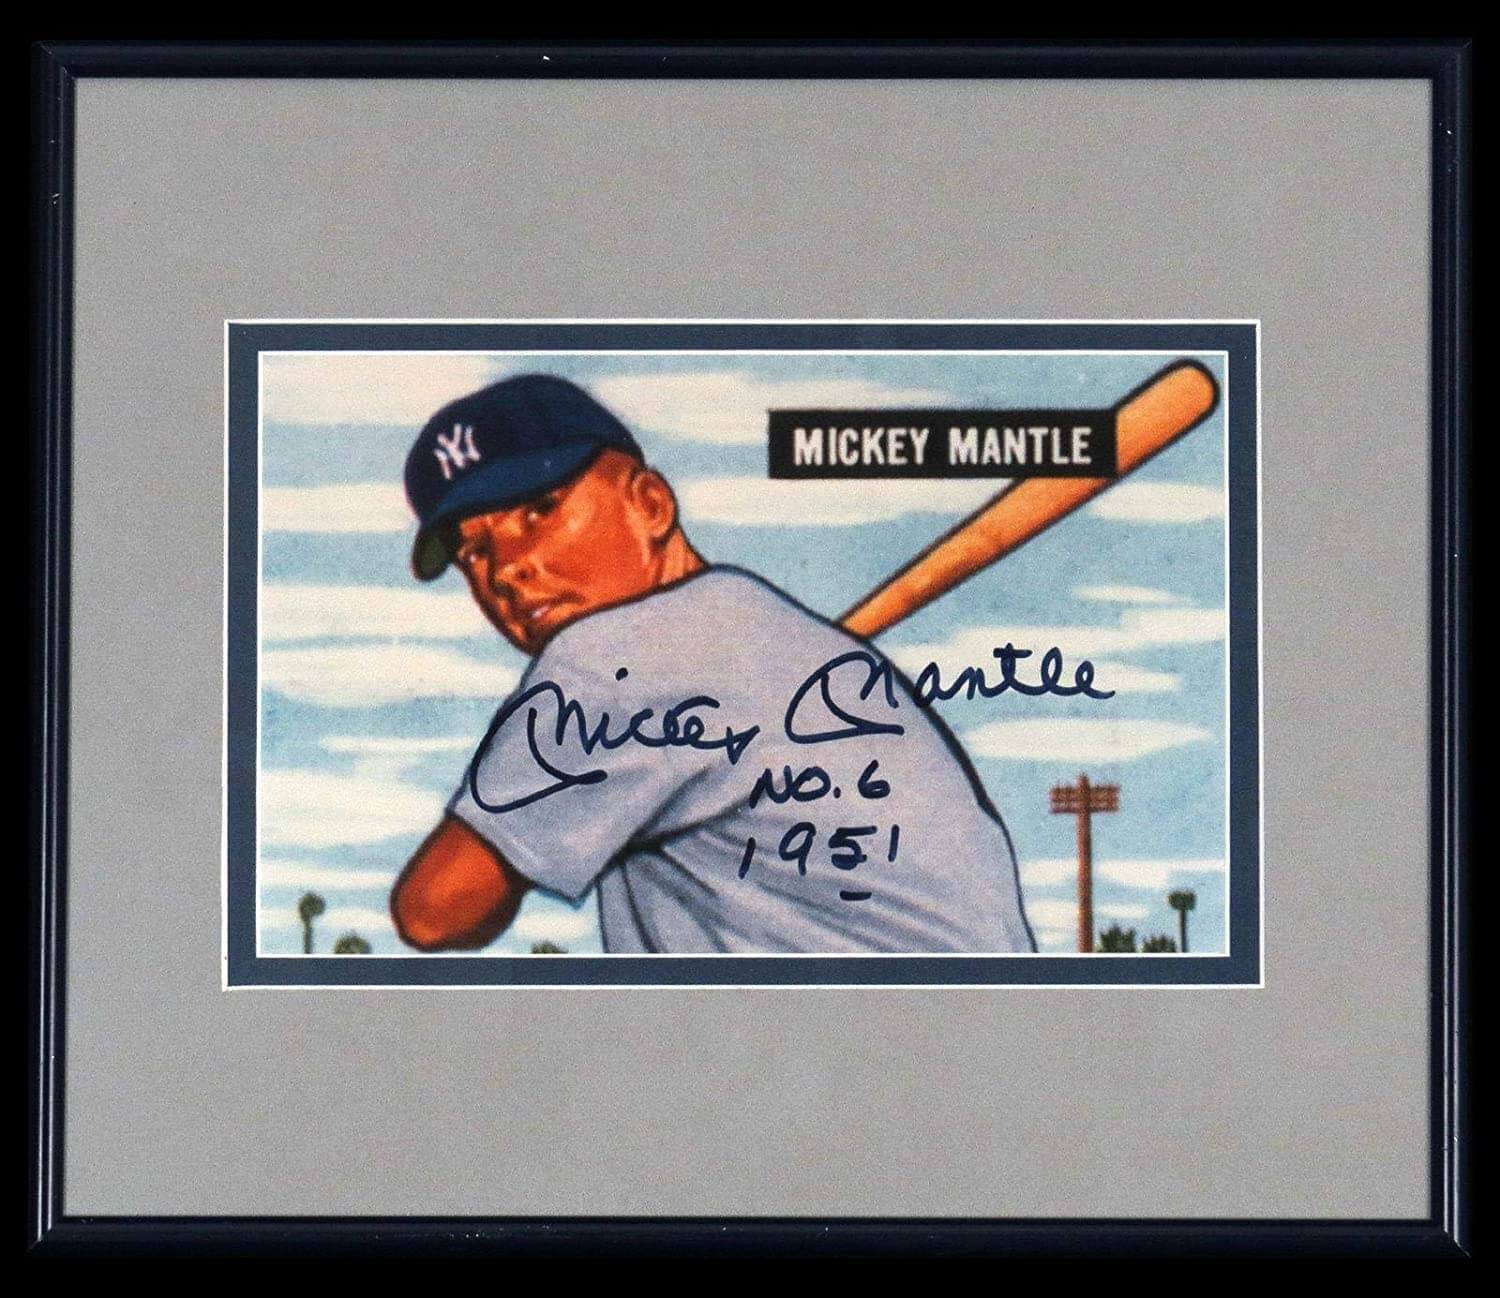 Mickey Mantle "No. 6 1951" Signed Inscribed Bowman Rookie Photo